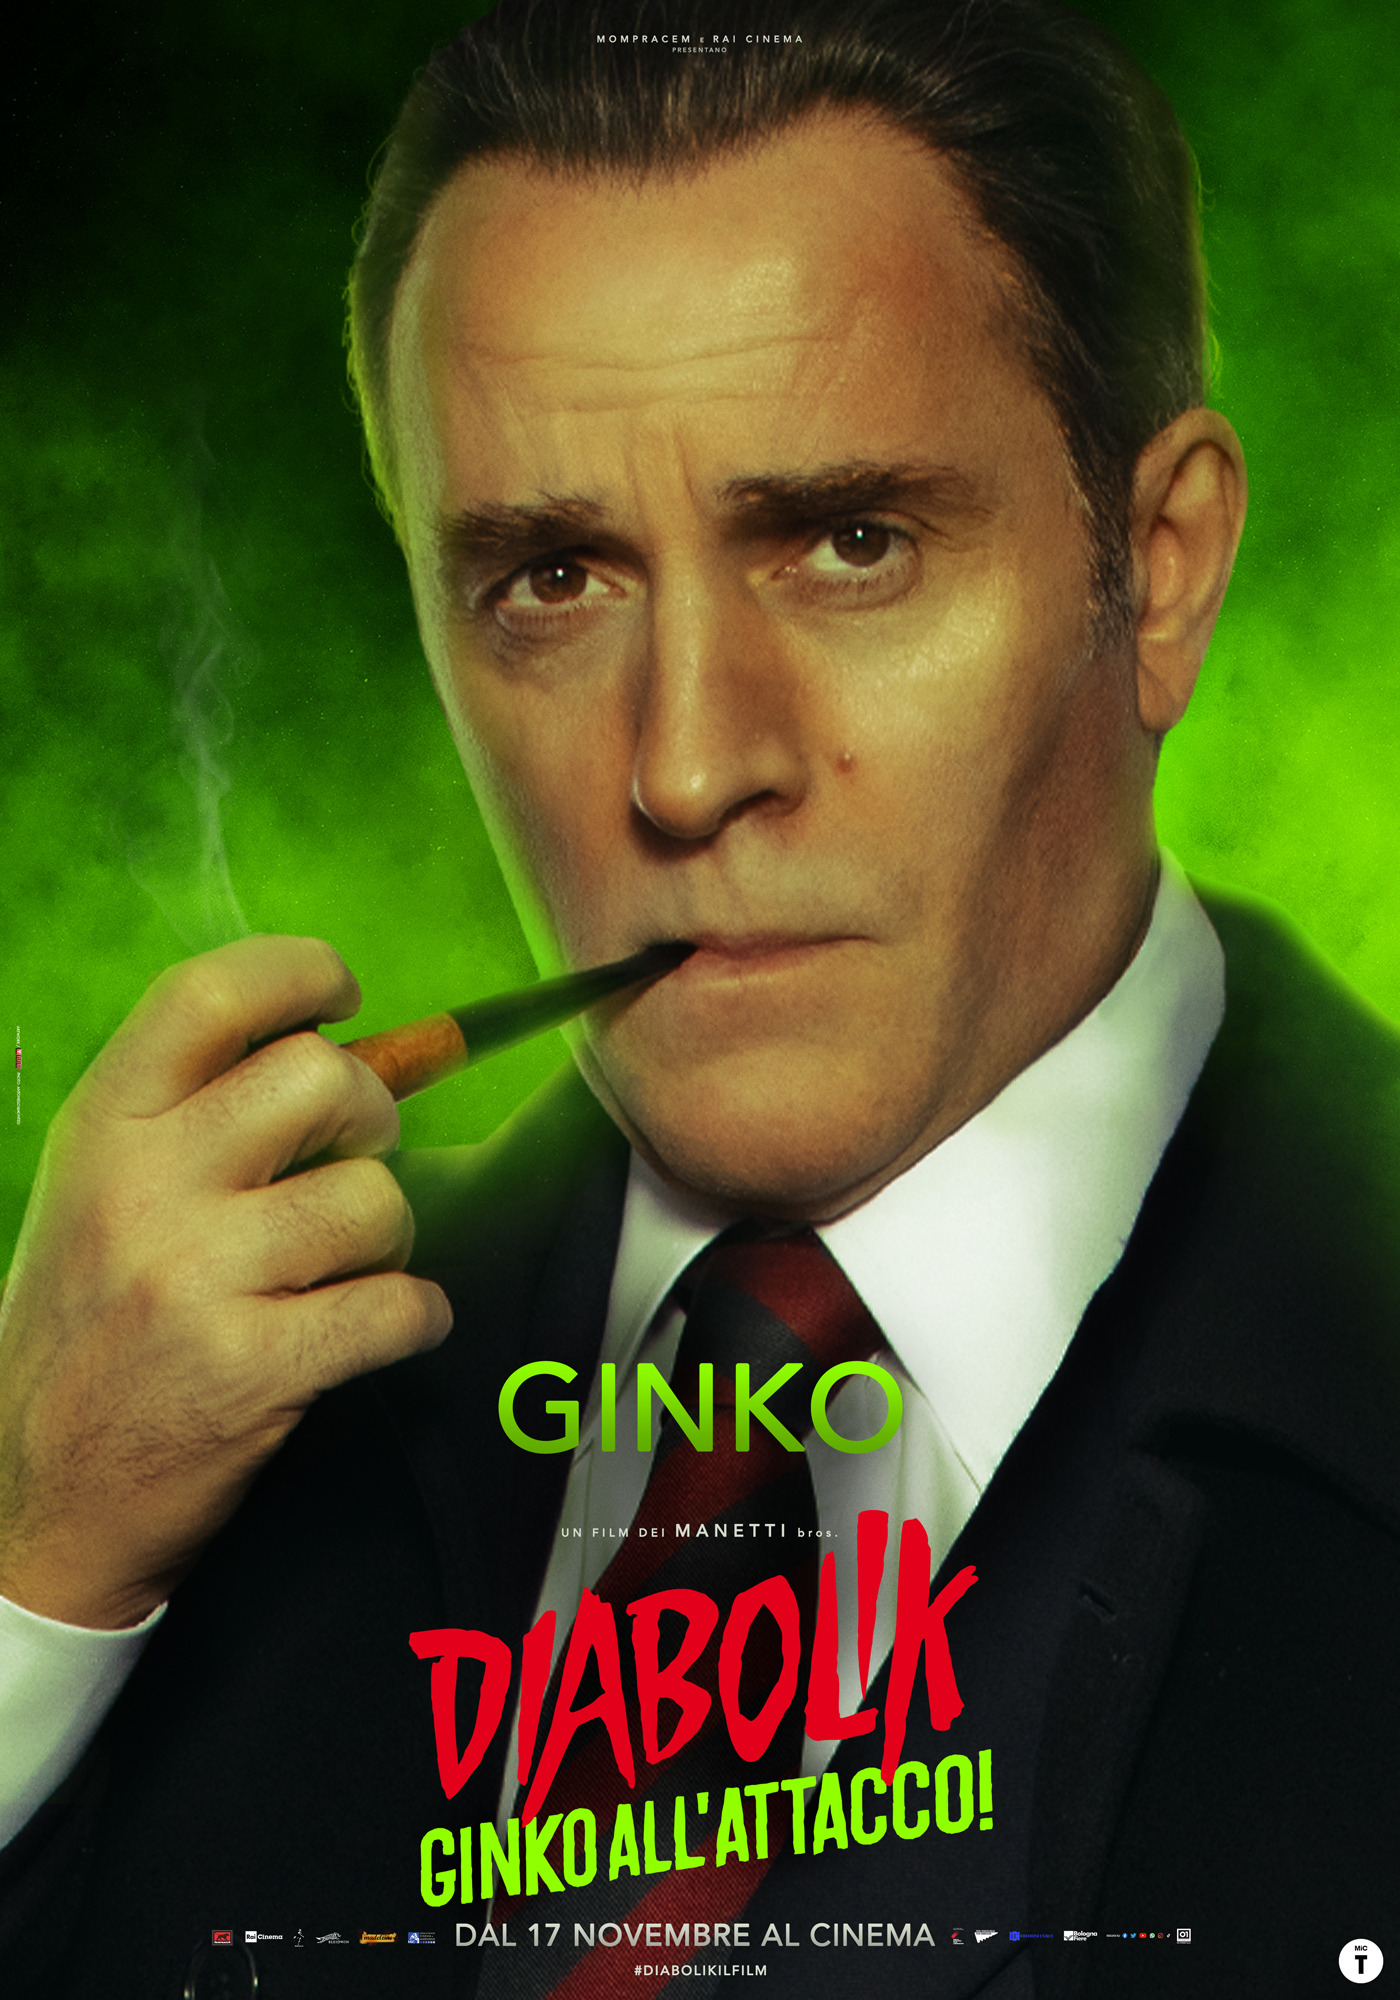 Mega Sized Movie Poster Image for Diabolik - Ginko all'attacco! (#6 of 7)